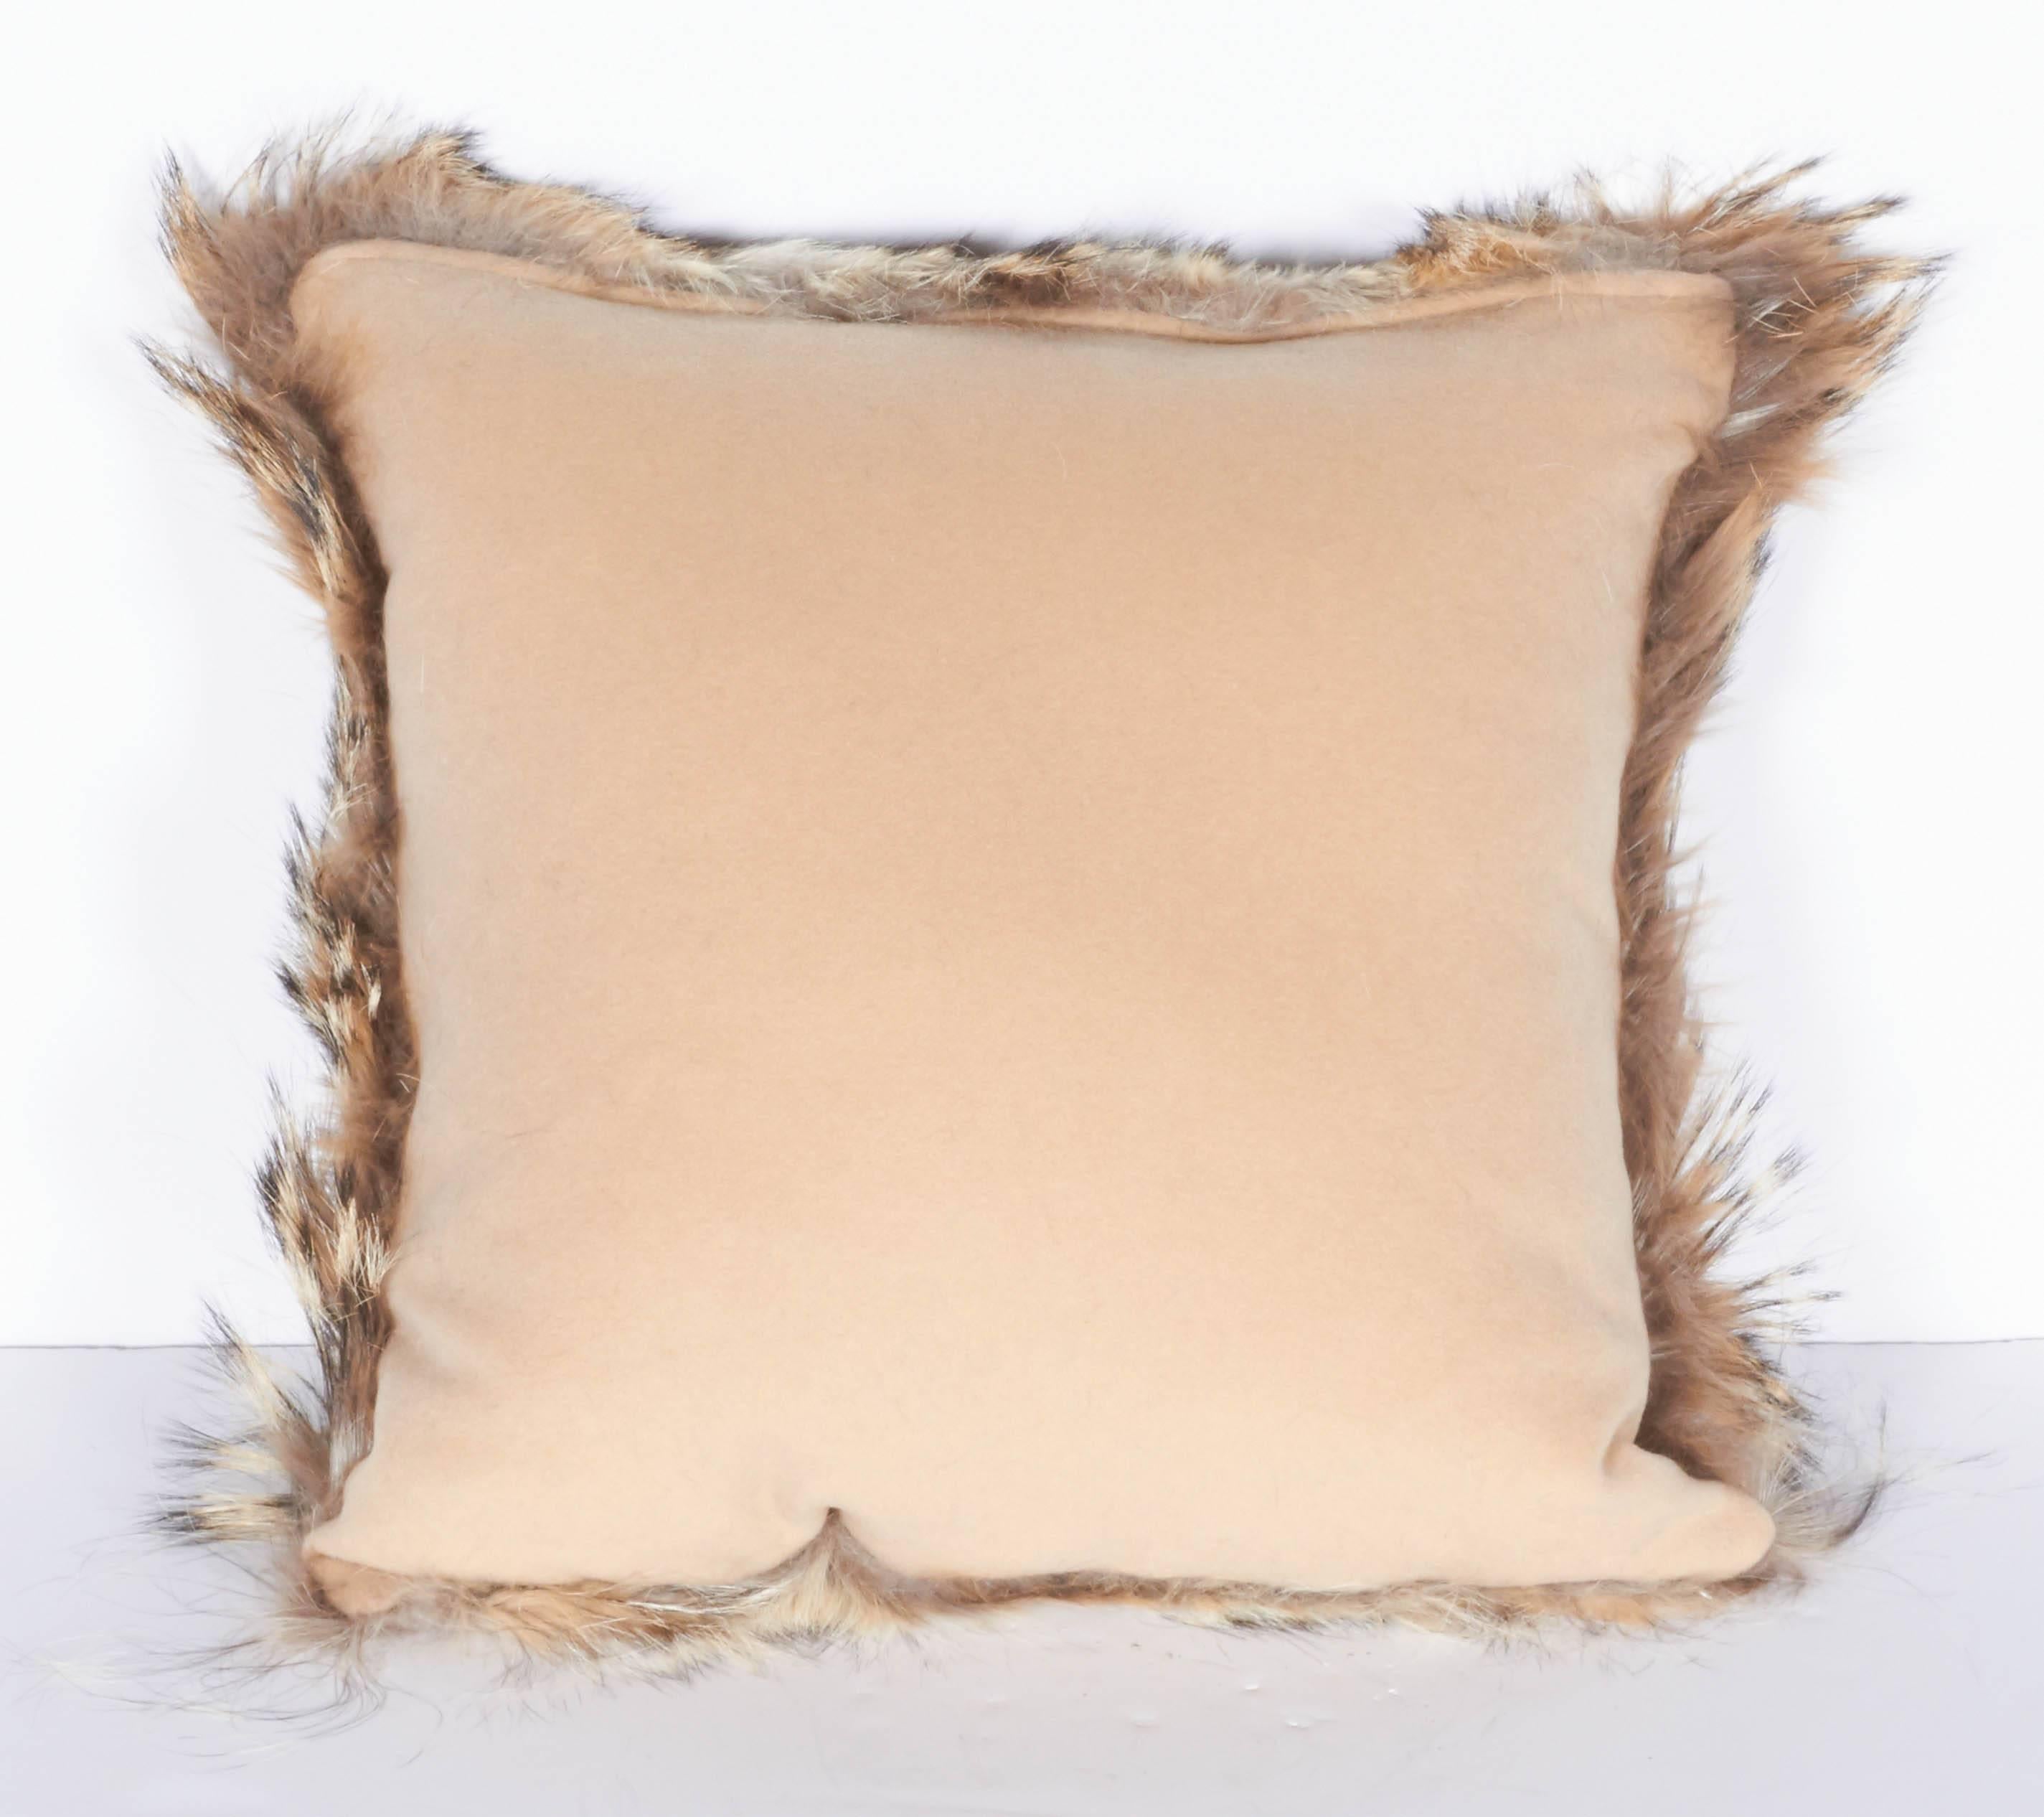 American Pair of Luxury Fur Throw Pillows in Coyote and Cashmere